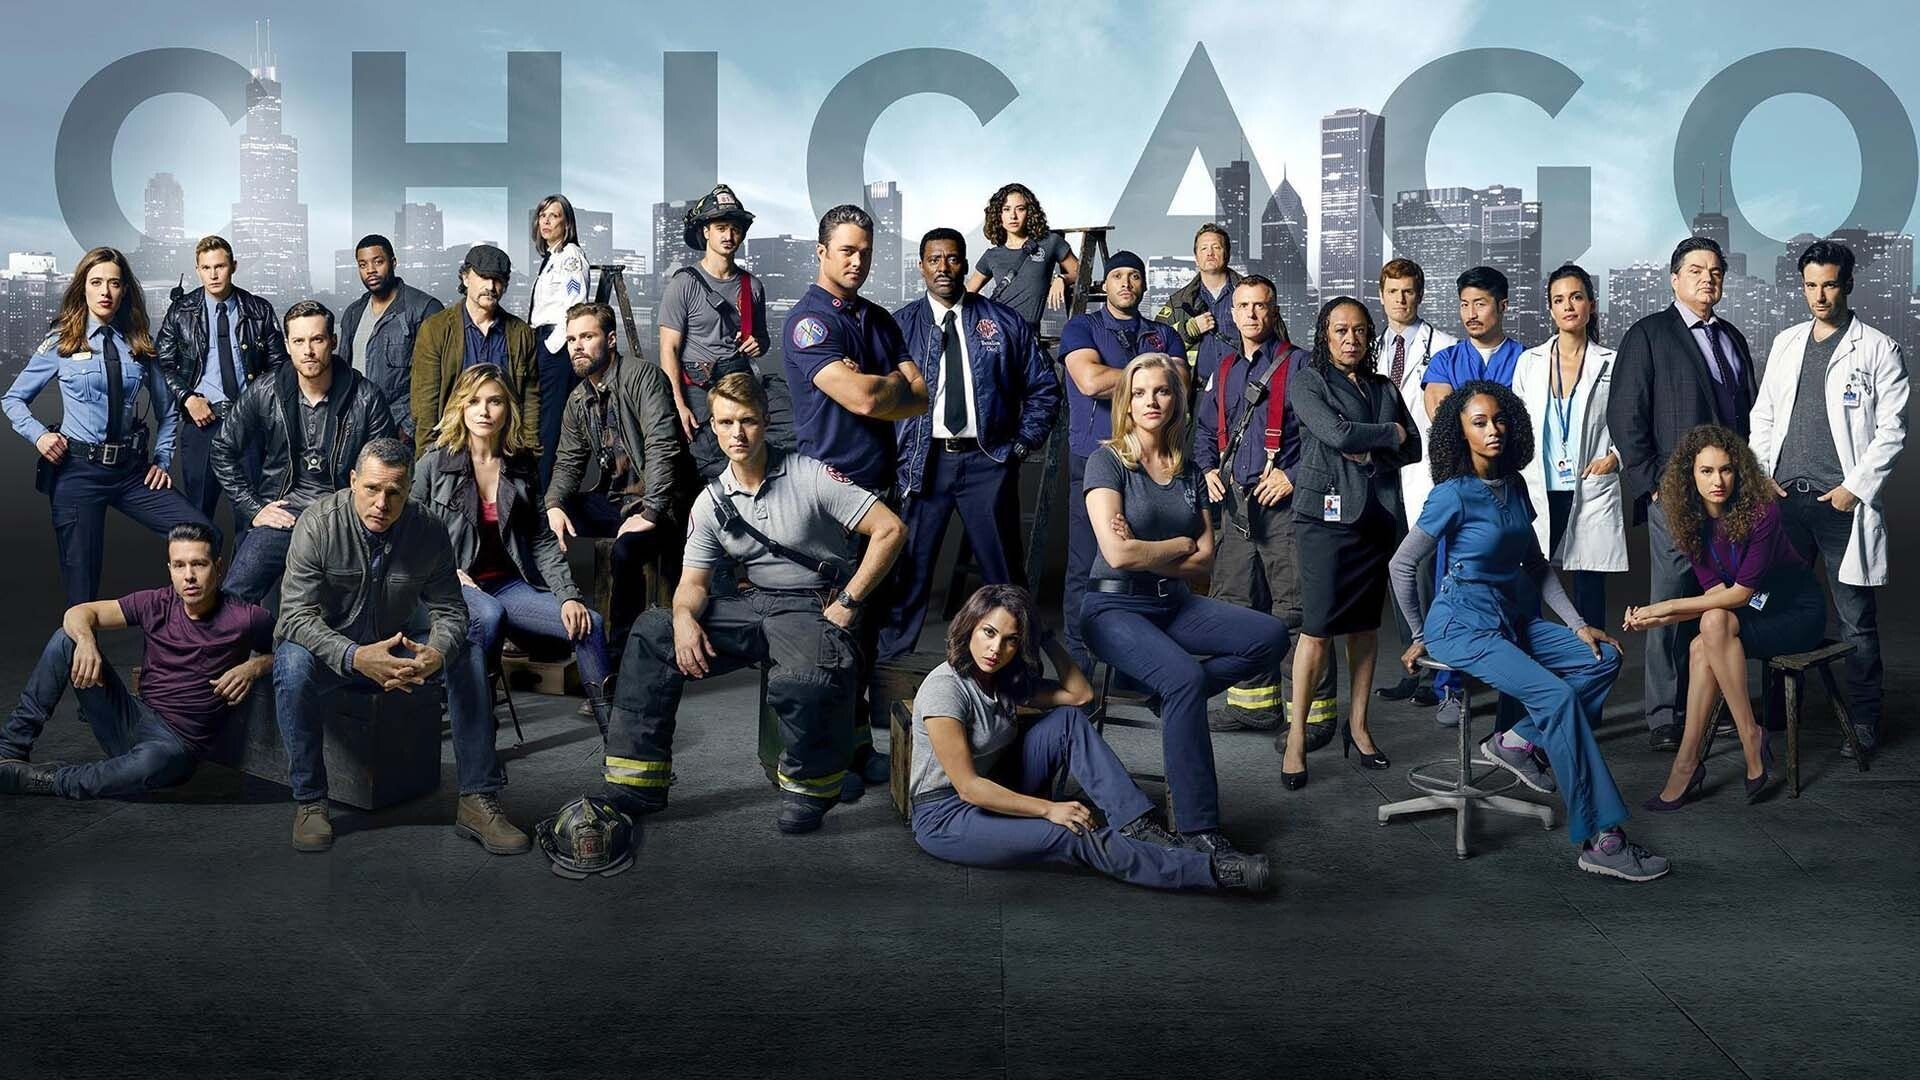 Chicago P.D. (TV Series): The Chicago Franchise, Also Called "One Chicago", A Media Franchise Of American Television Programs Created By Derek Haas. 1920x1080 Full HD Wallpaper.